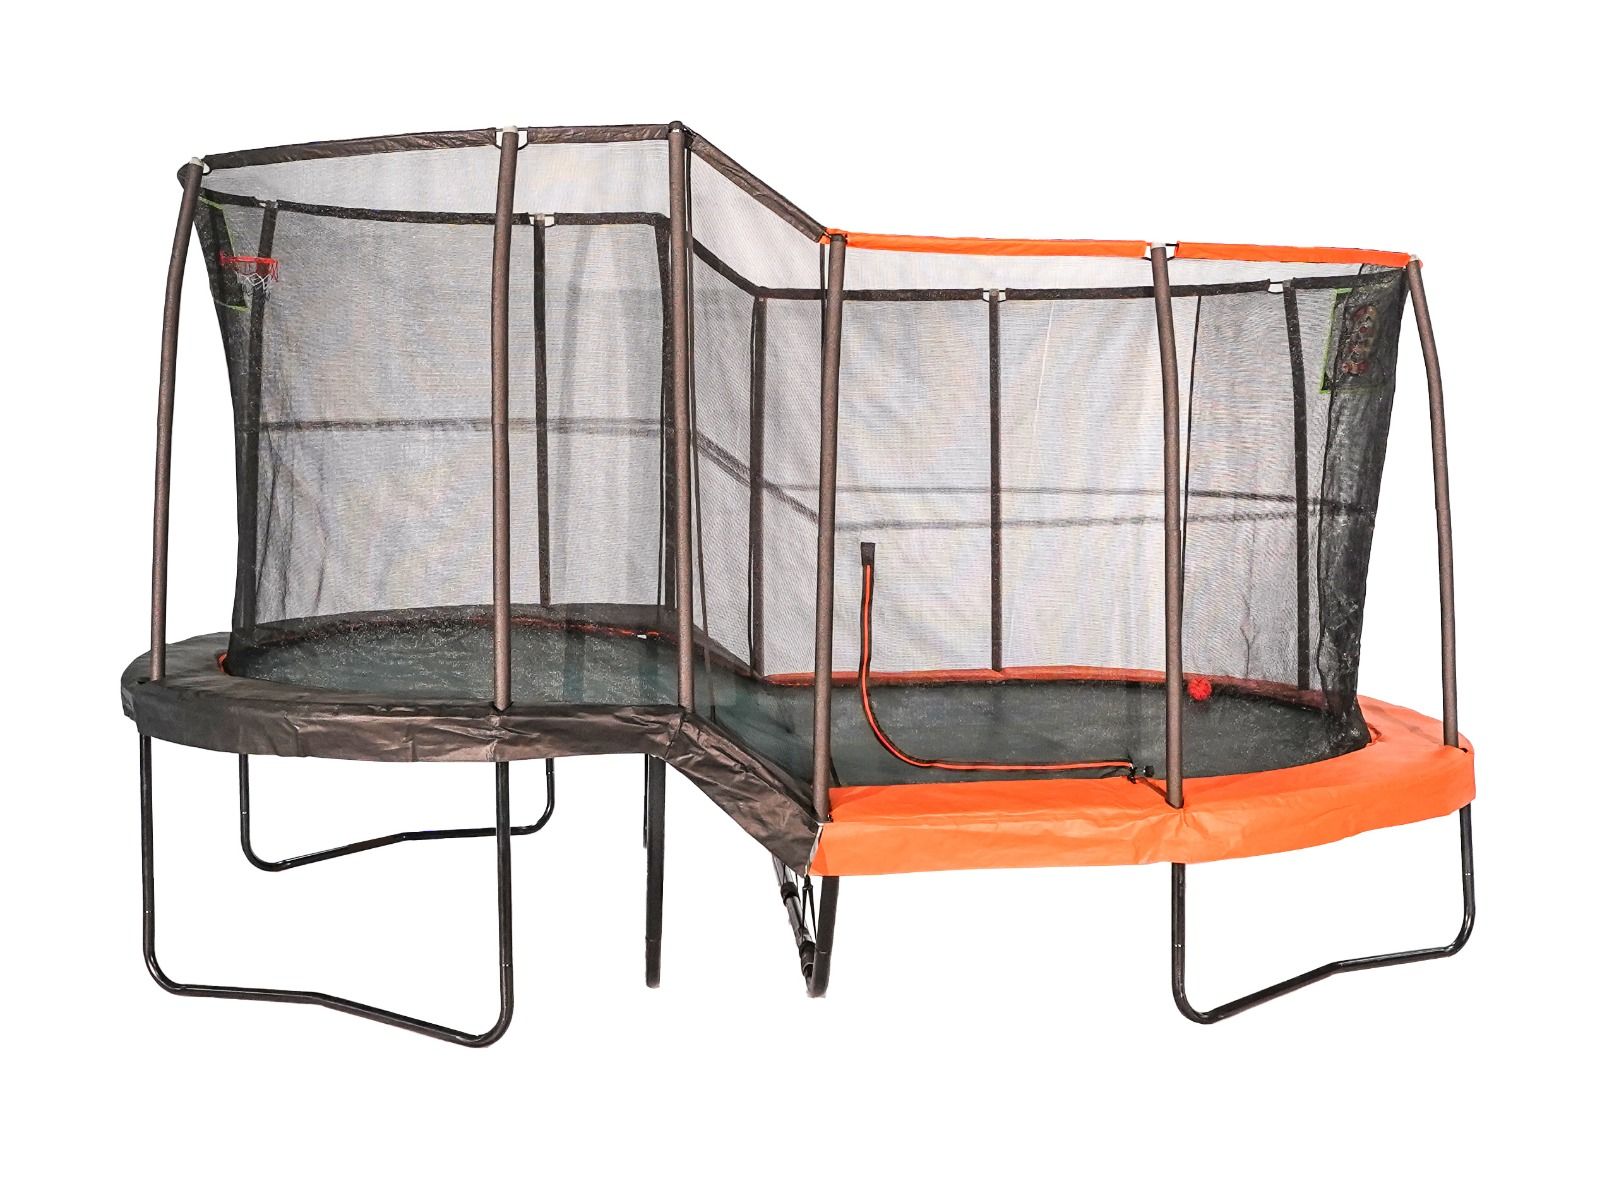 JumpKing - 10’ X 17’ Oval Multi Level Heavy Duty Trampoline With Toss Game And Hoop Accessory - JKLCOV1017C4